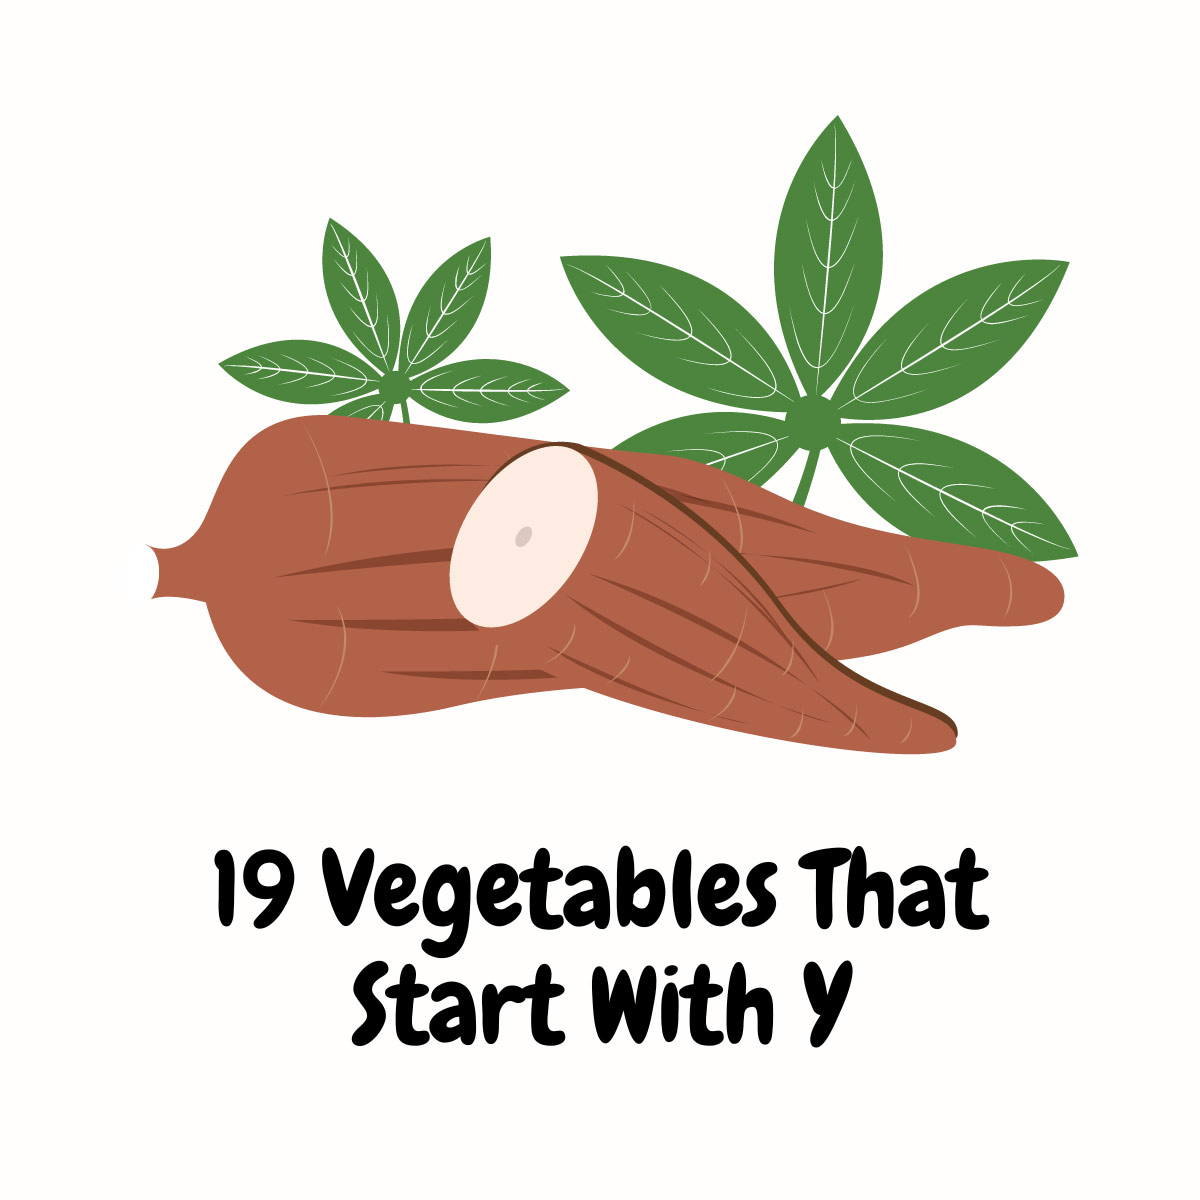 Vegetables That Start With Y featured image | Girl Meets Food